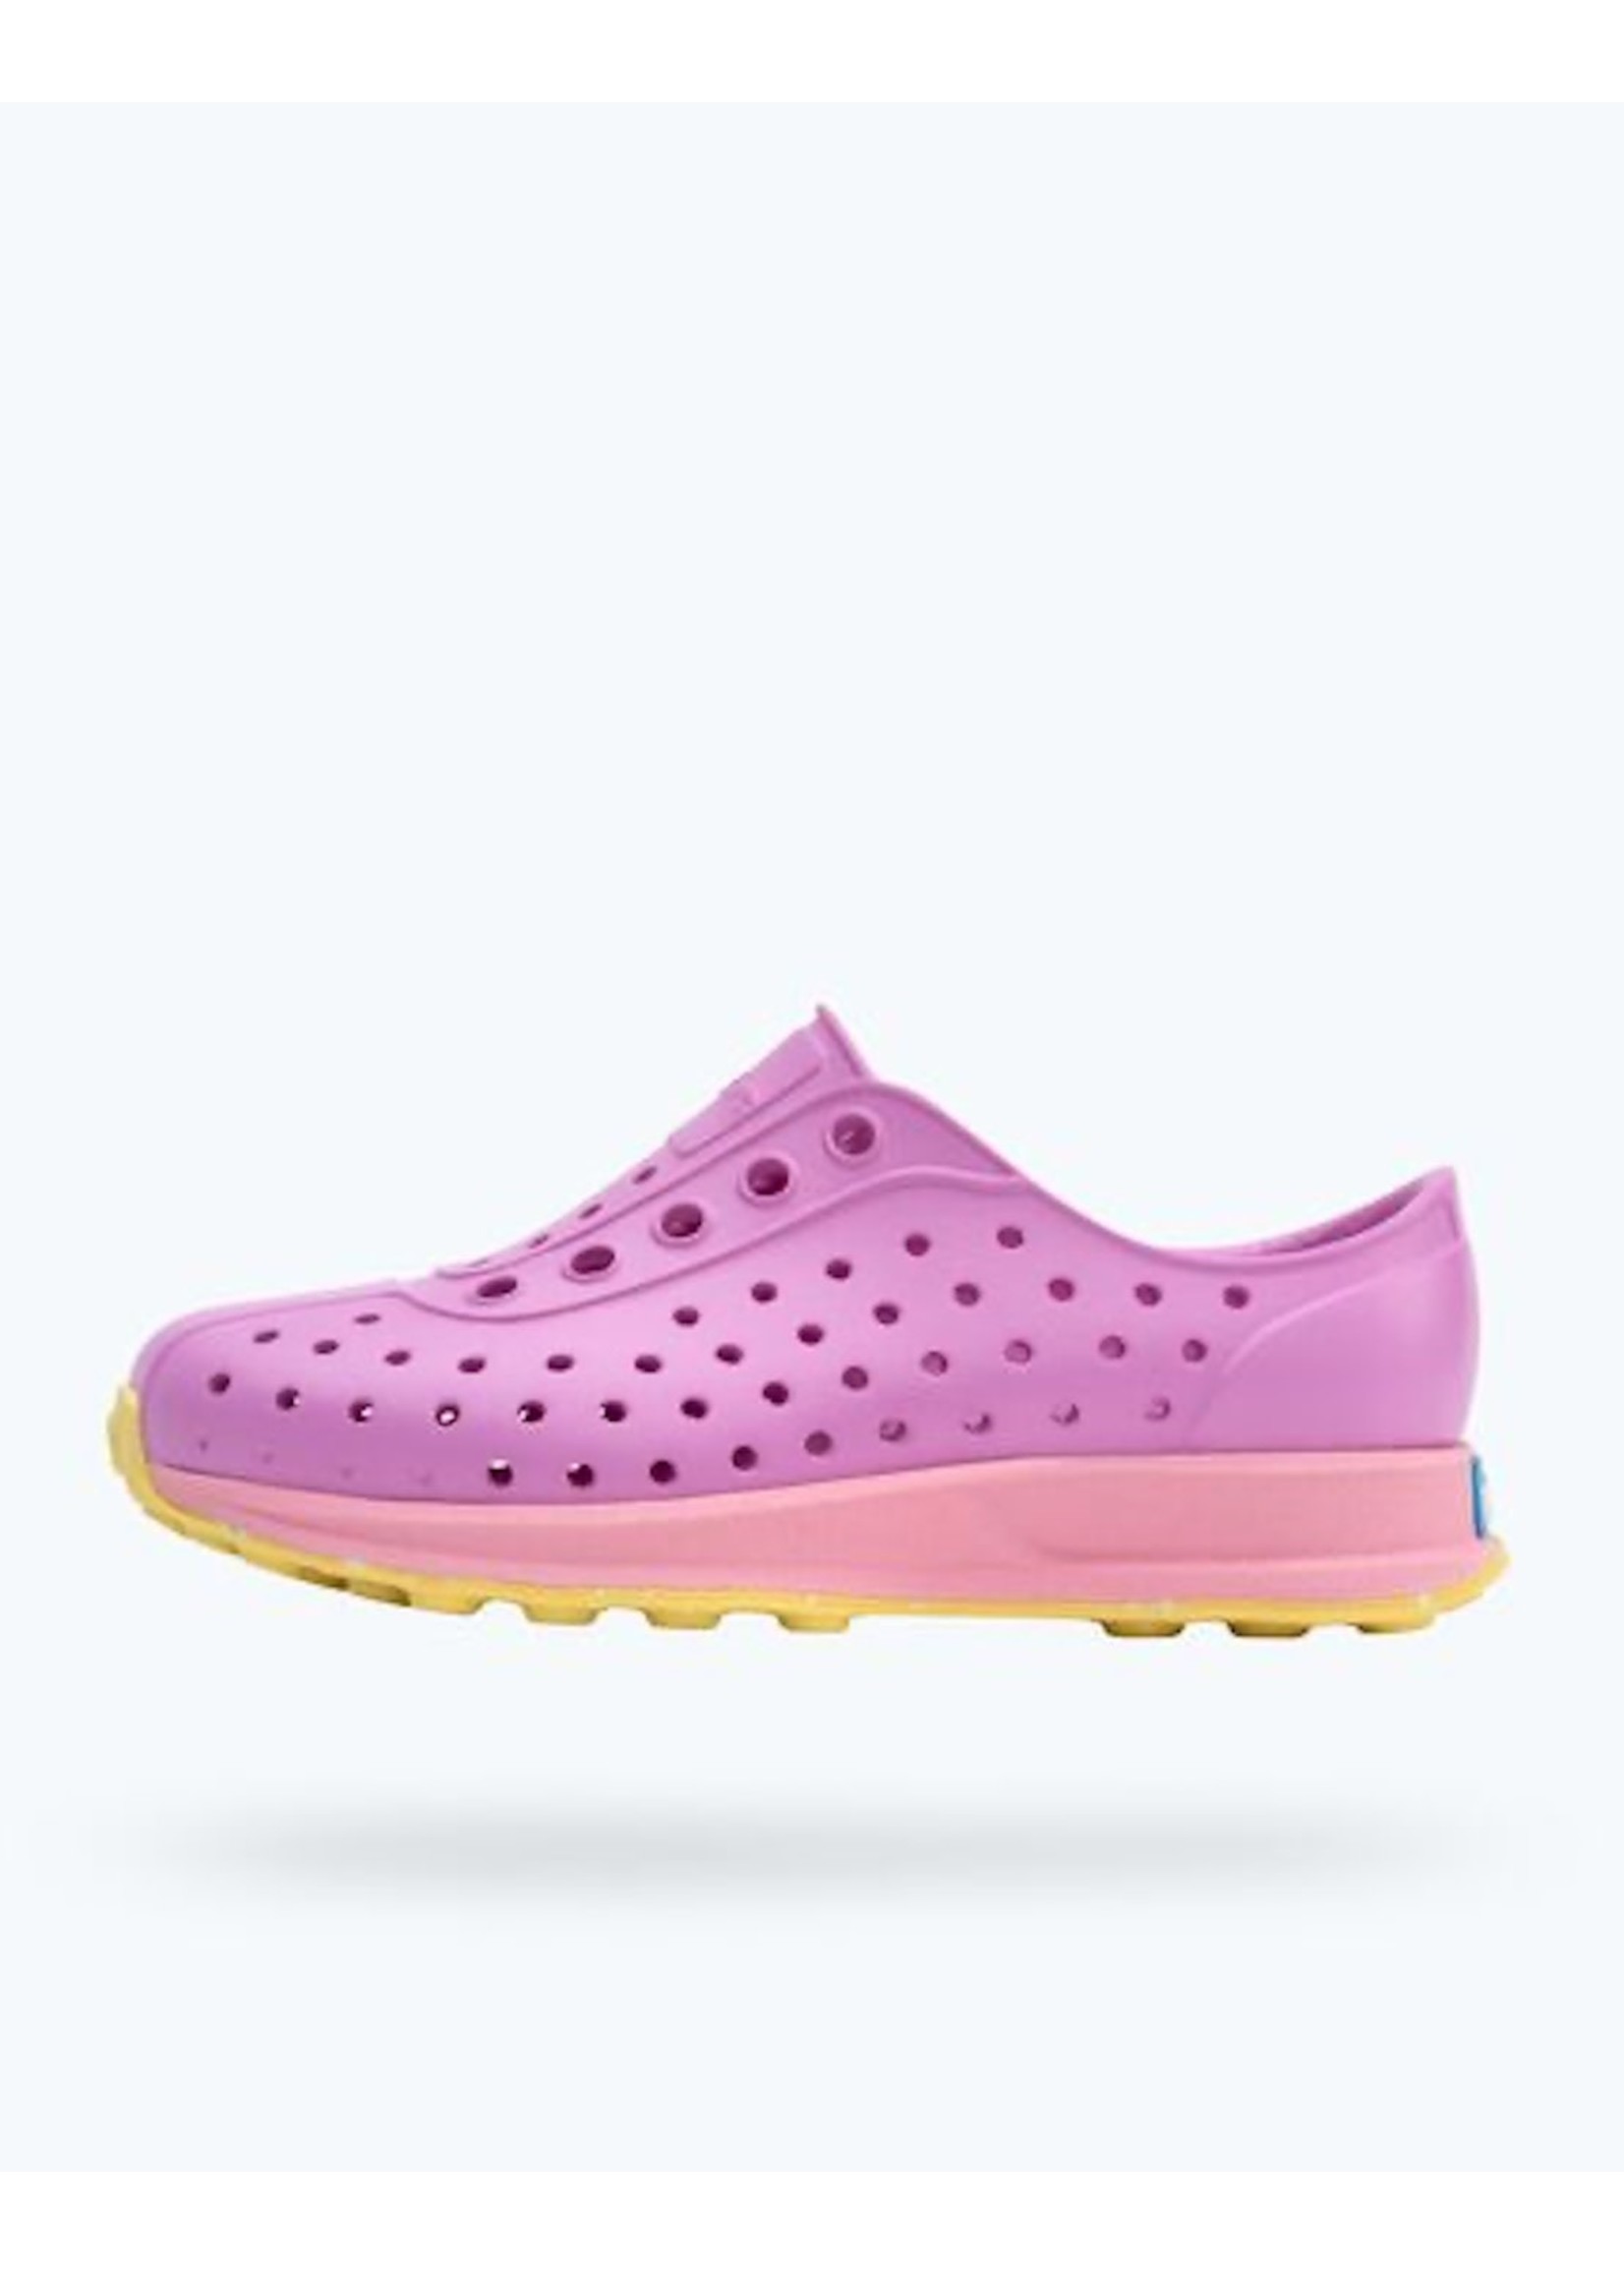 Native Shoes Native Shoes, Robbie Sugarlite™ Child || Winterberry Pink/ Princess Pink/ Morning Speckle Rubber